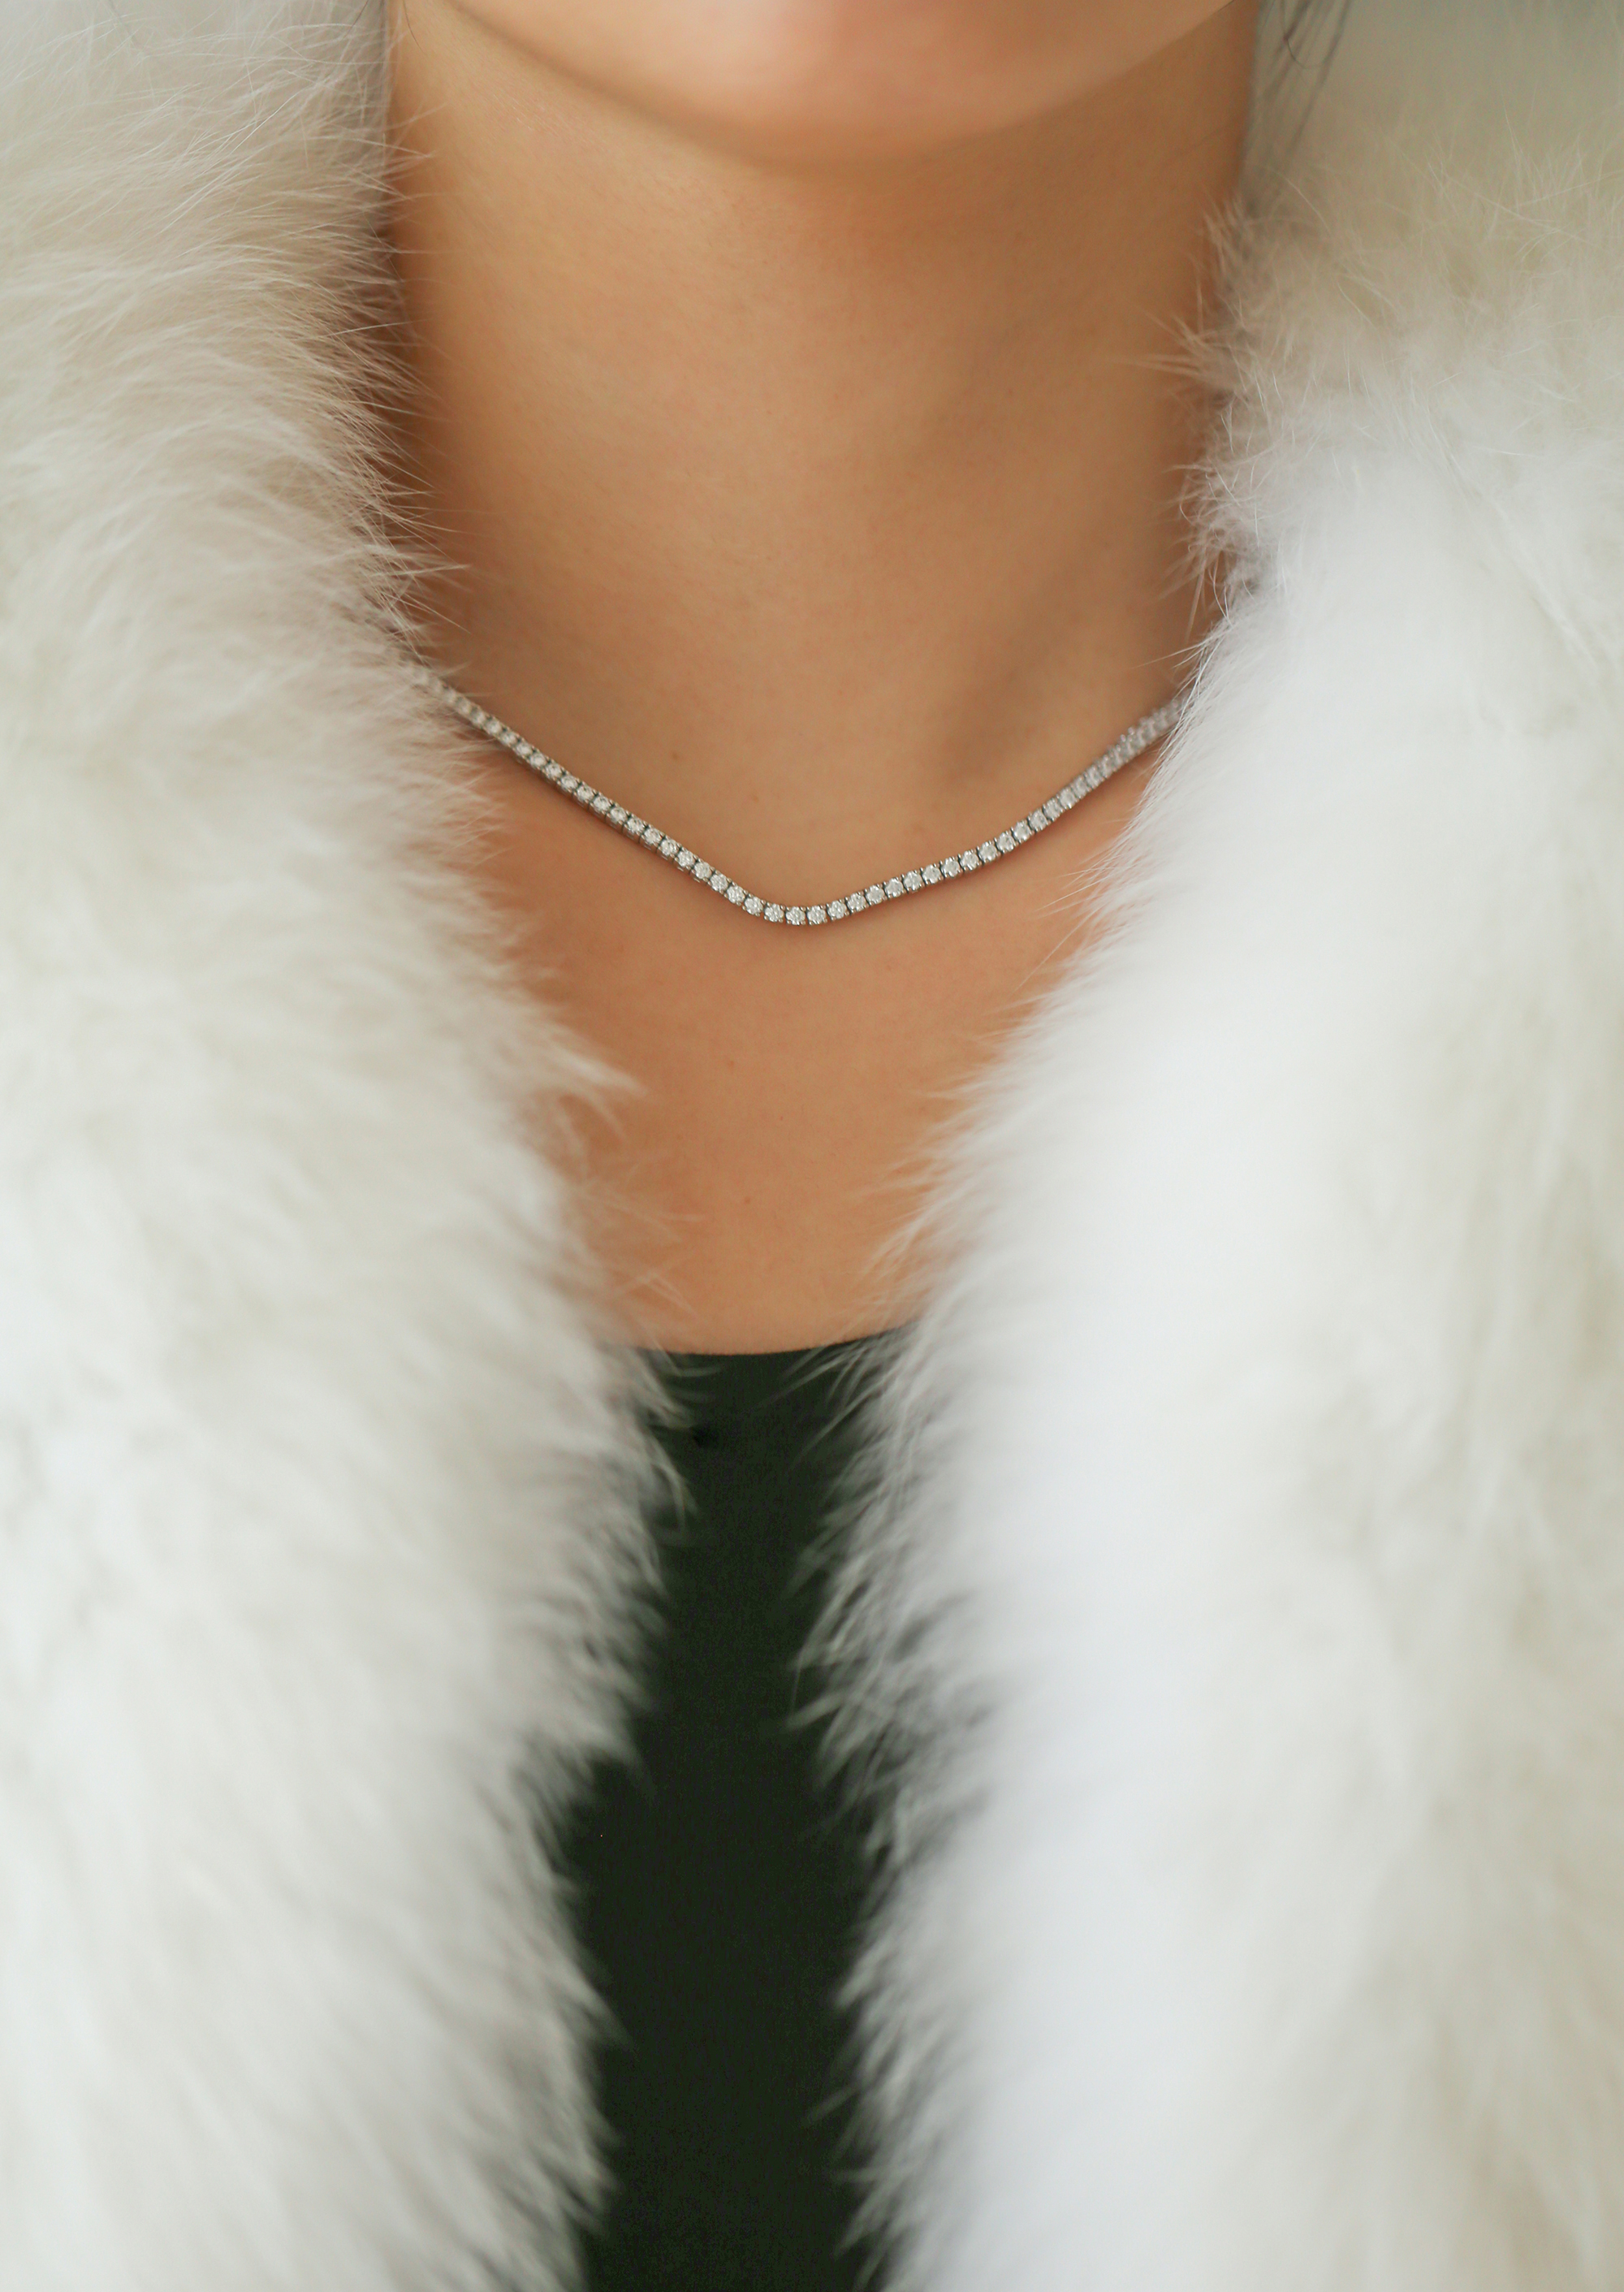 THE SILVER TENNIS NECKLACE